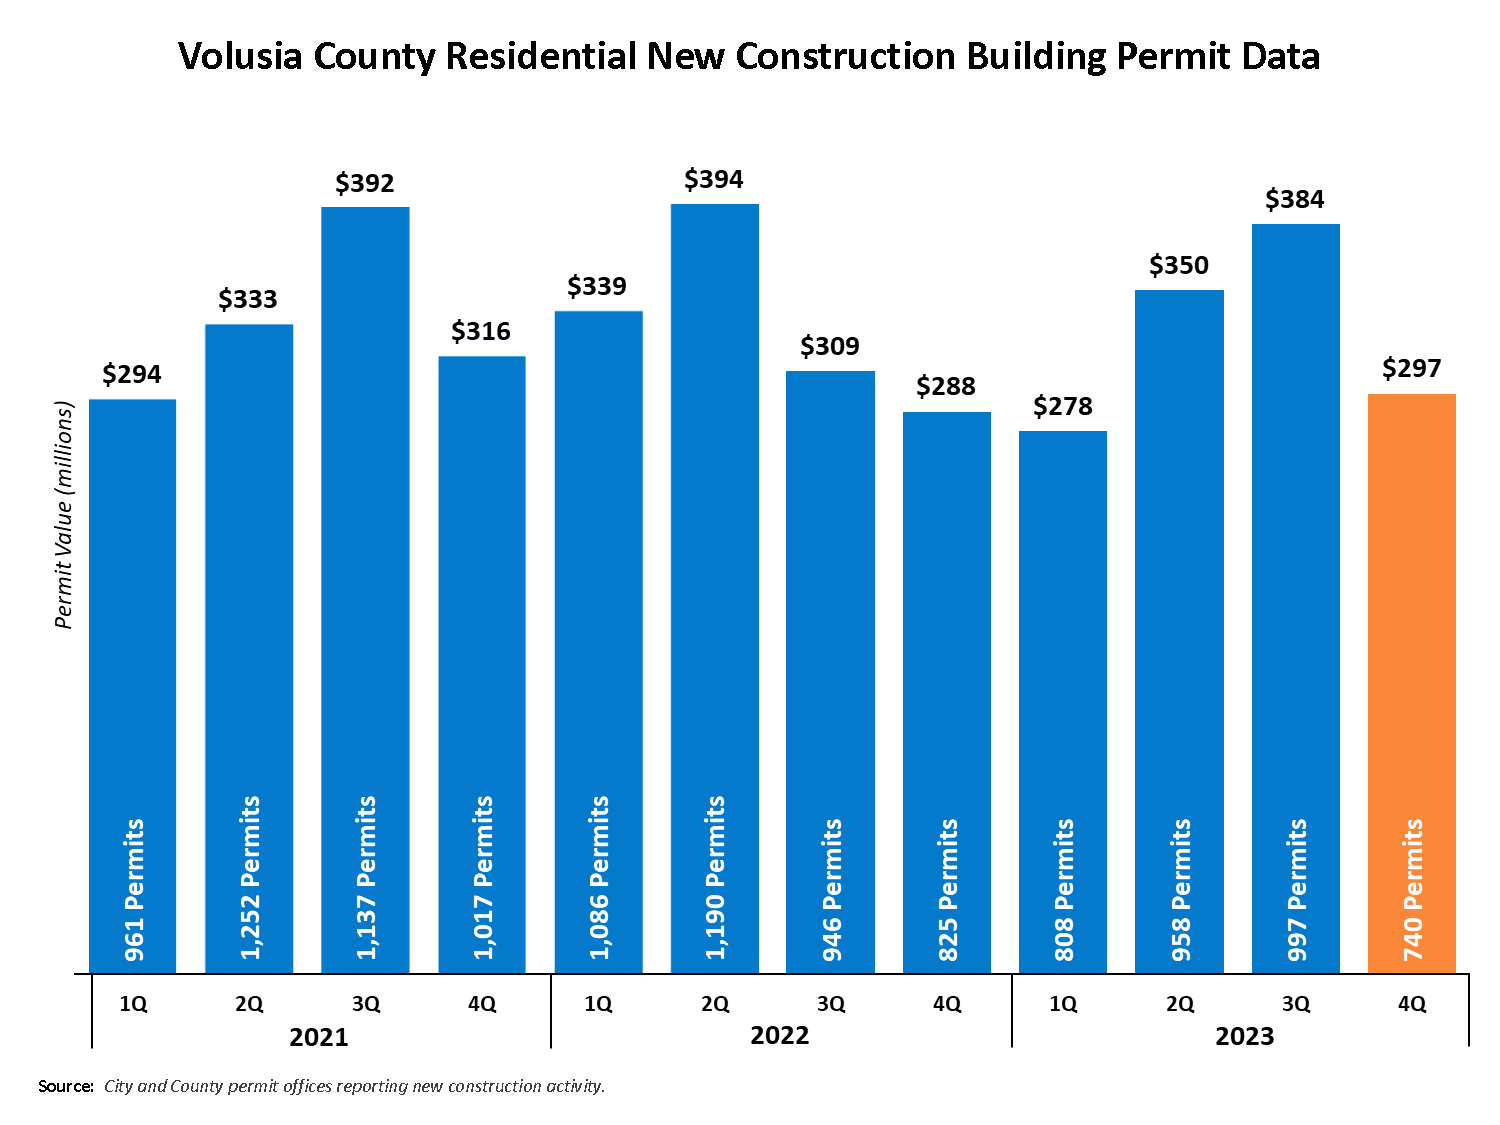 Chart showing the 12 most recent quarters of residential building permit activity ending March 2023.